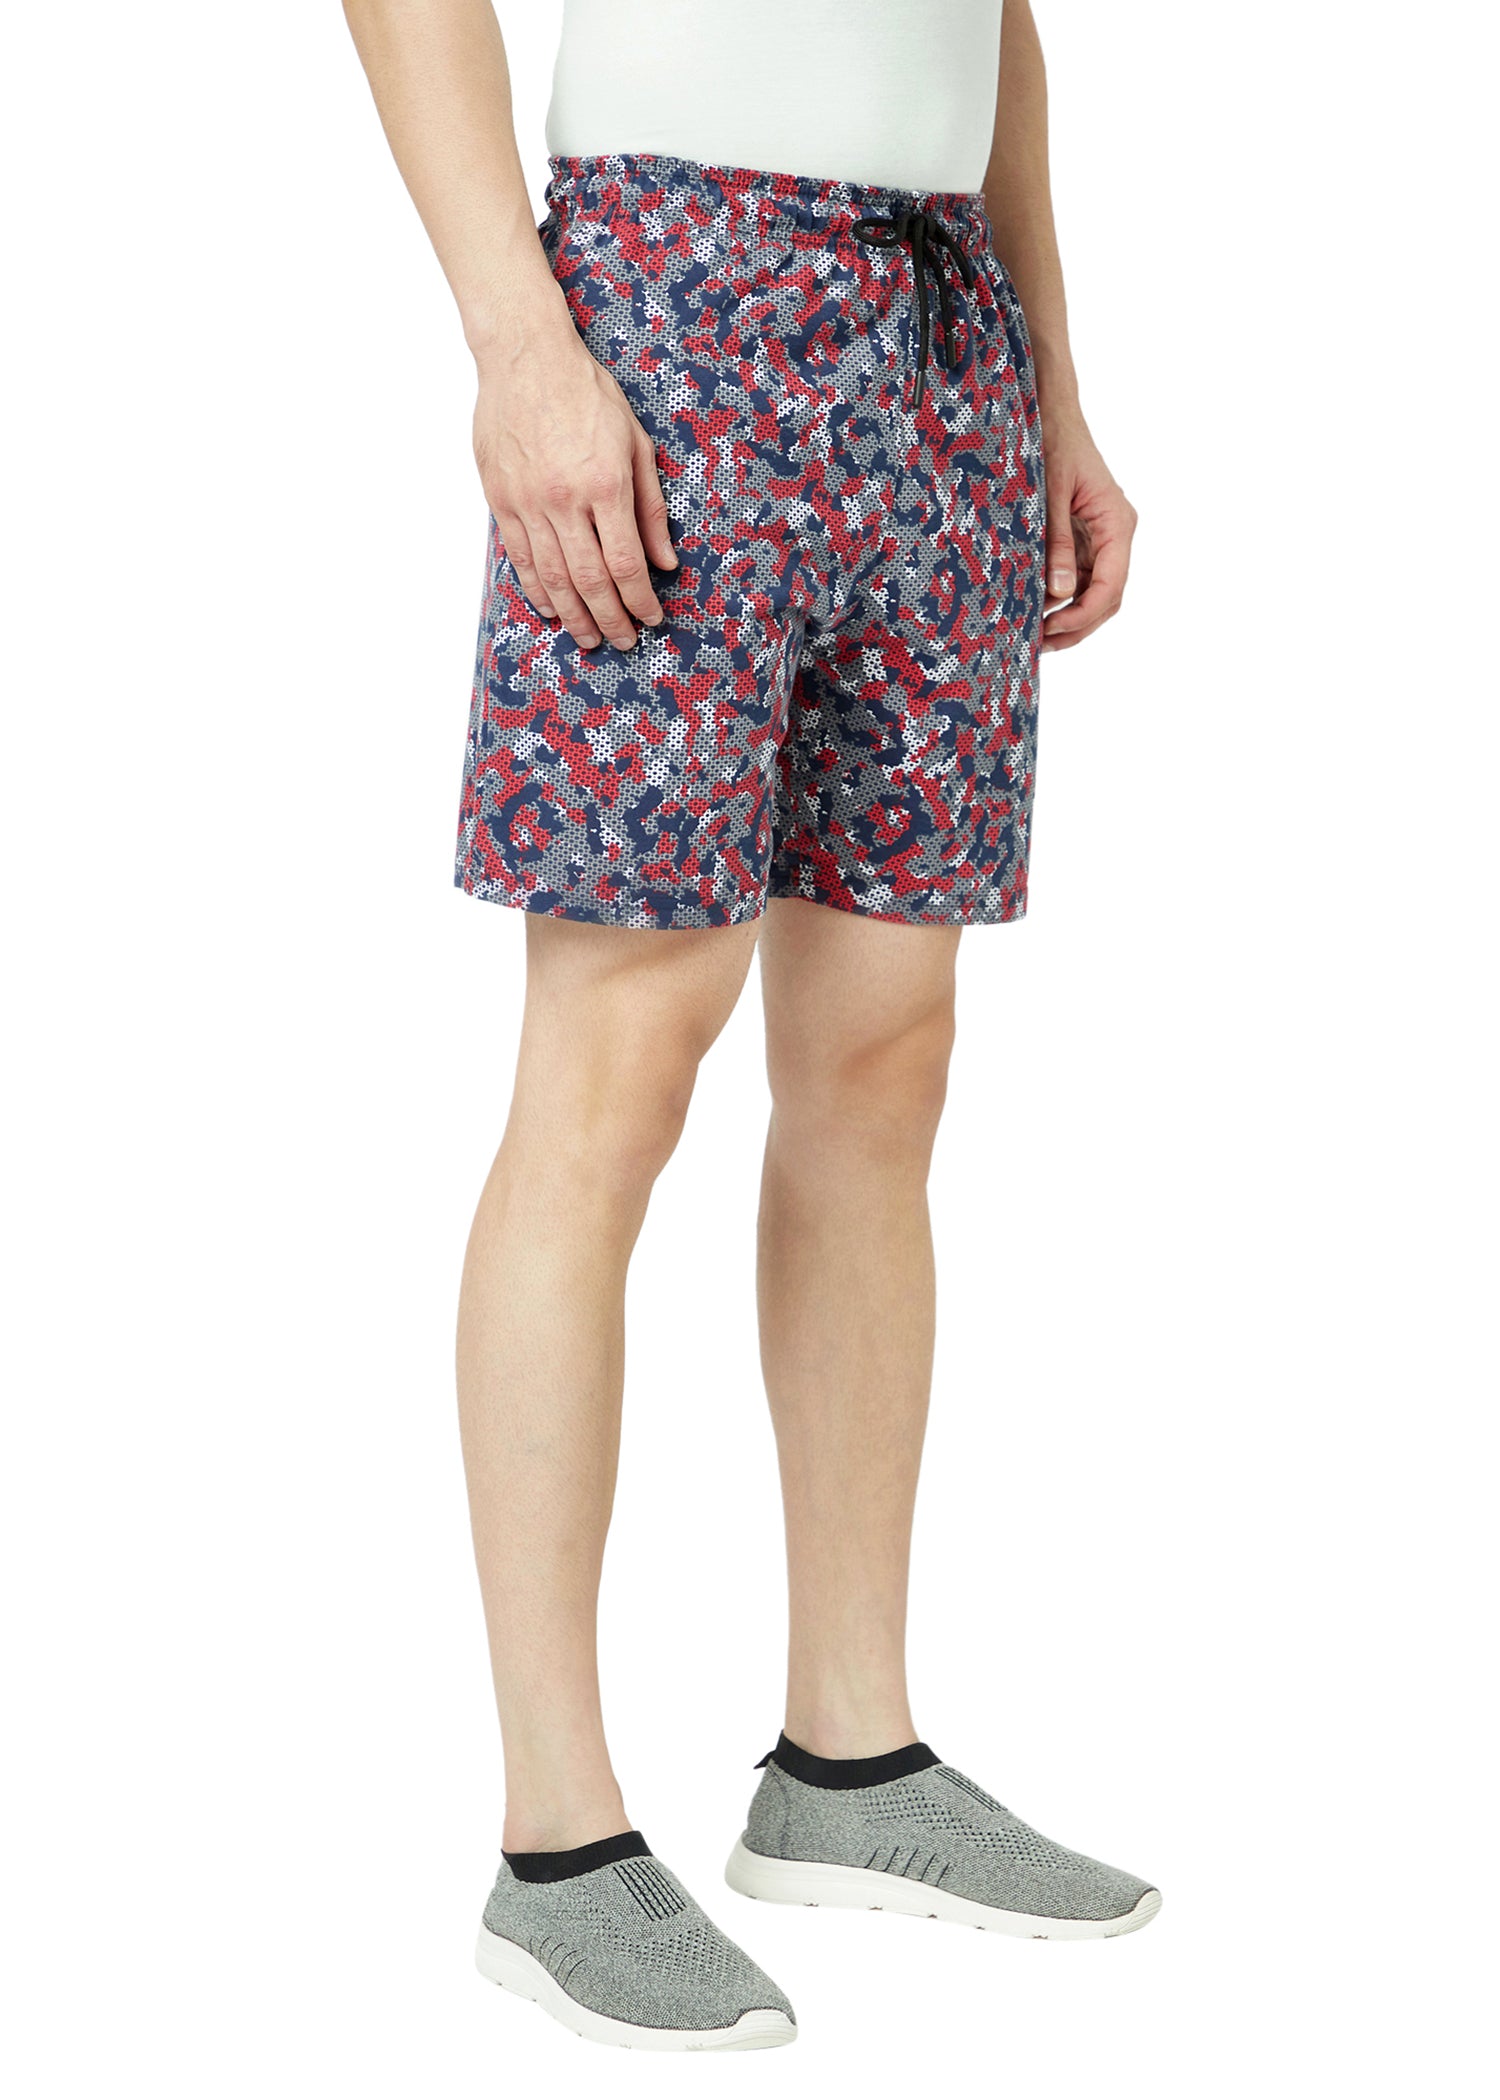 T.T. Mens Cotton Regular Fit  Printed Bermuda Shorts With Zipper  Grey Red